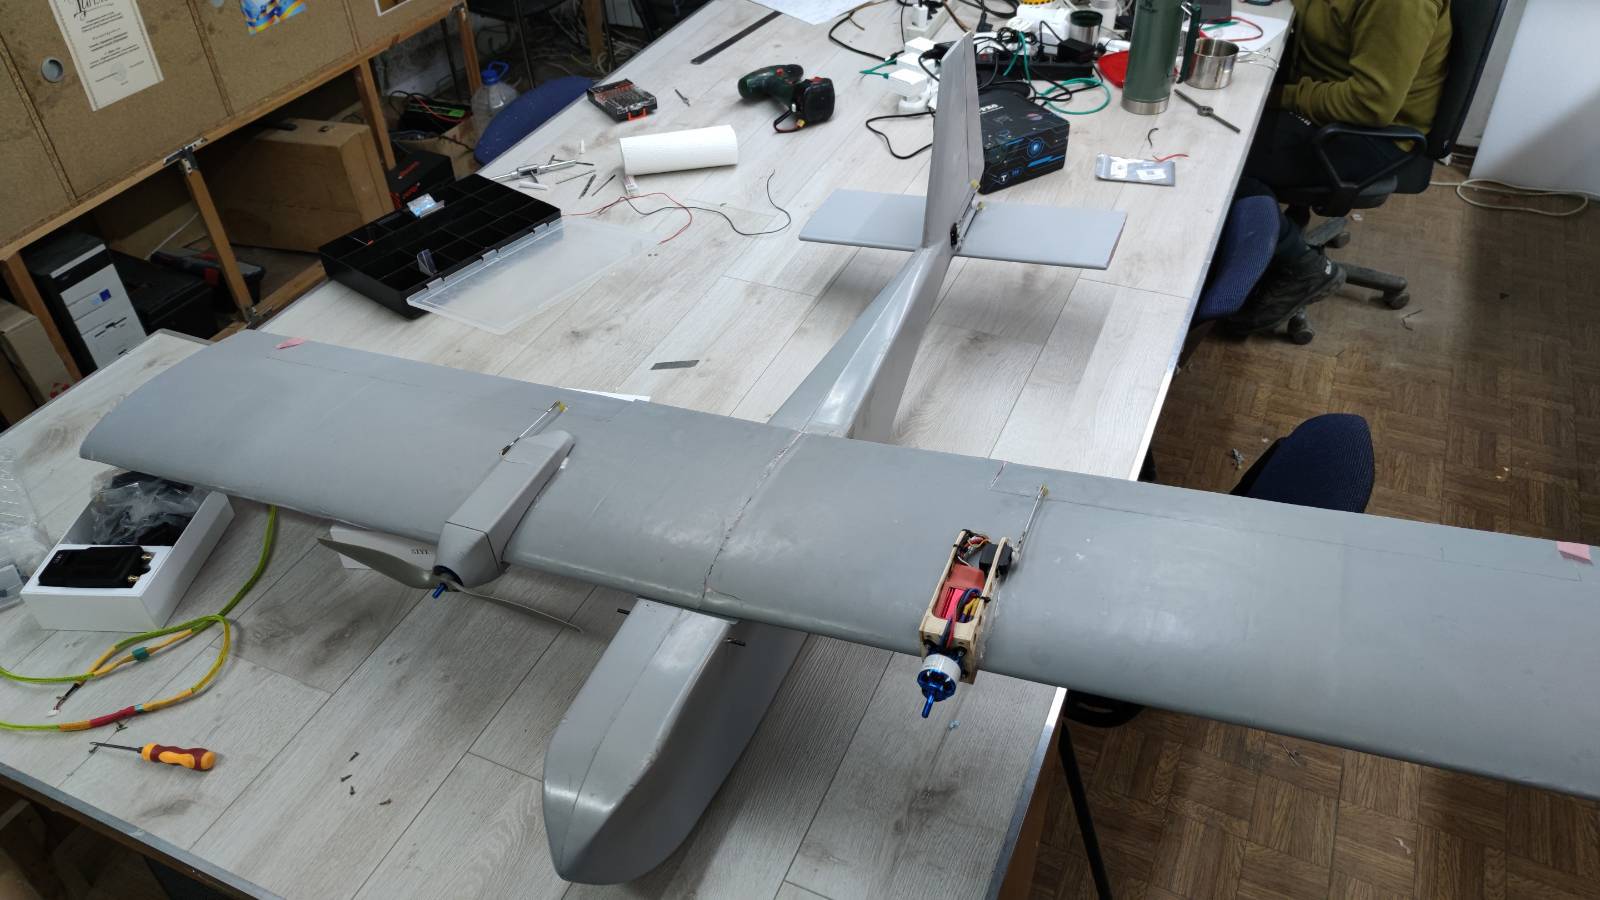 Nearly fully assembled plastic drone